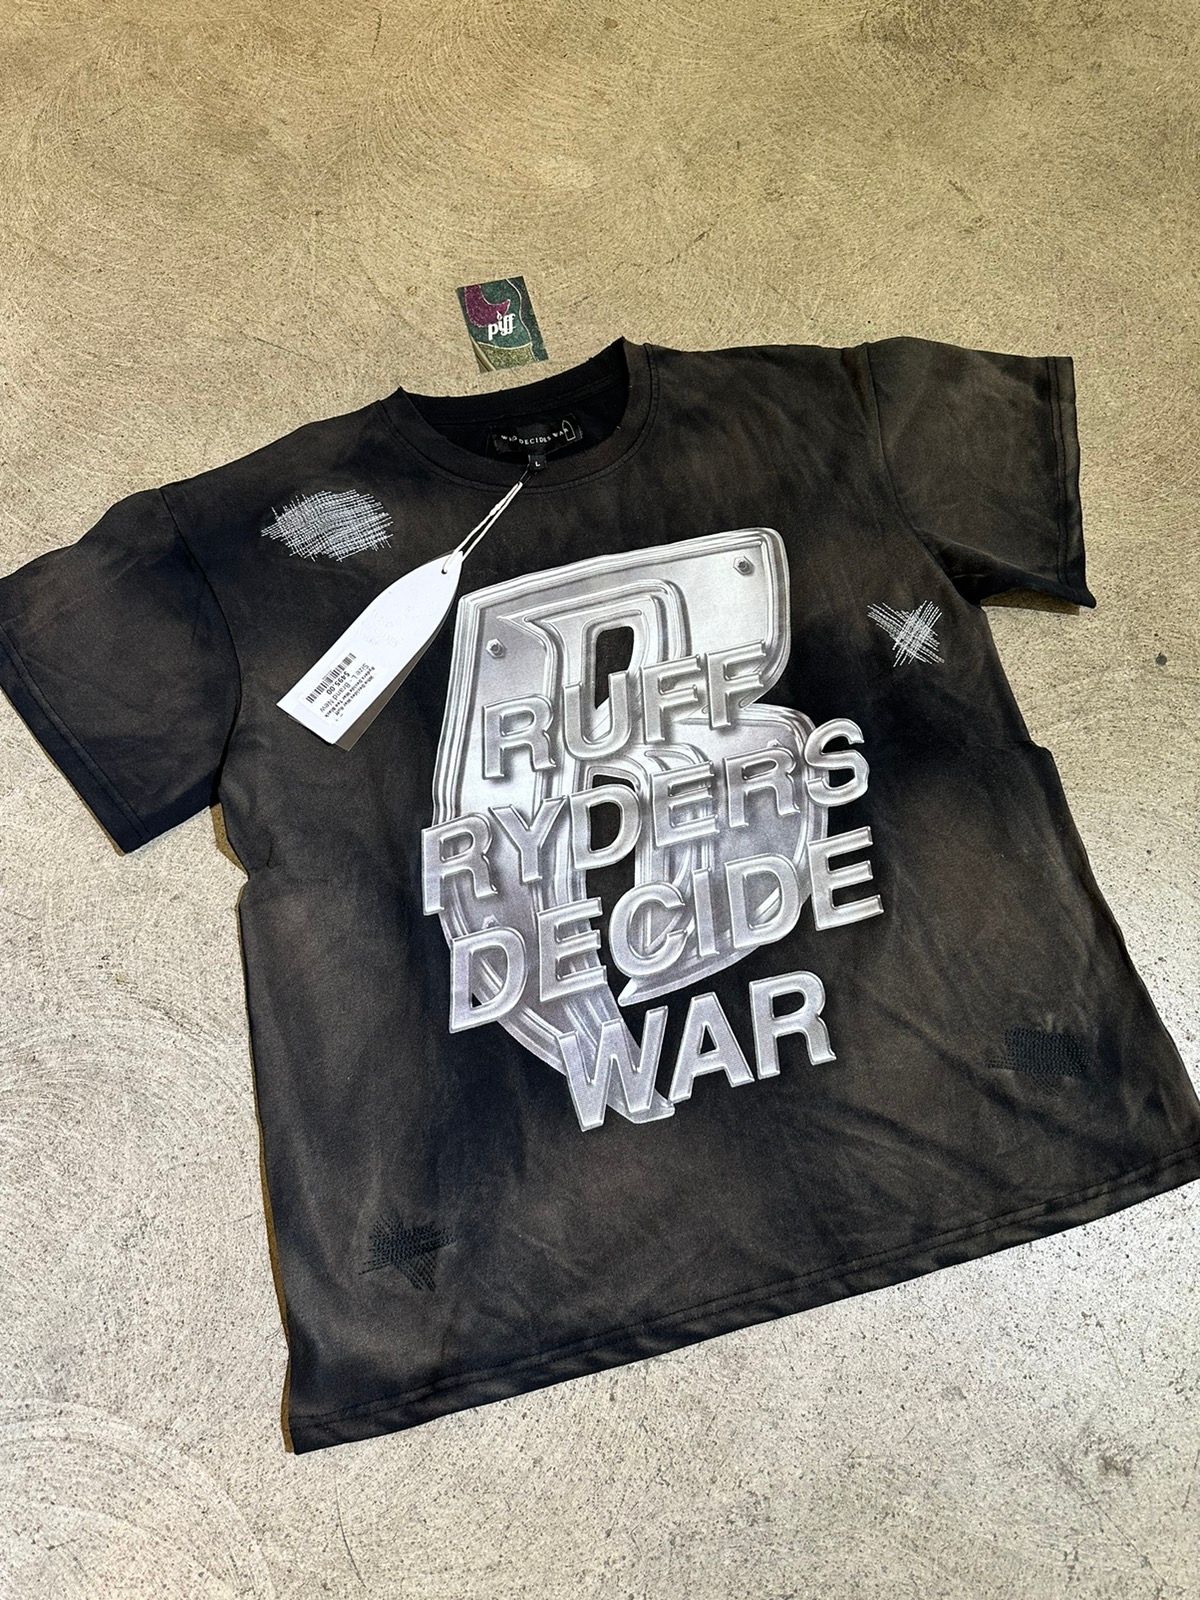 Pre-owned Who Decides War Ruff Ryders Decide War Tee Black Size L